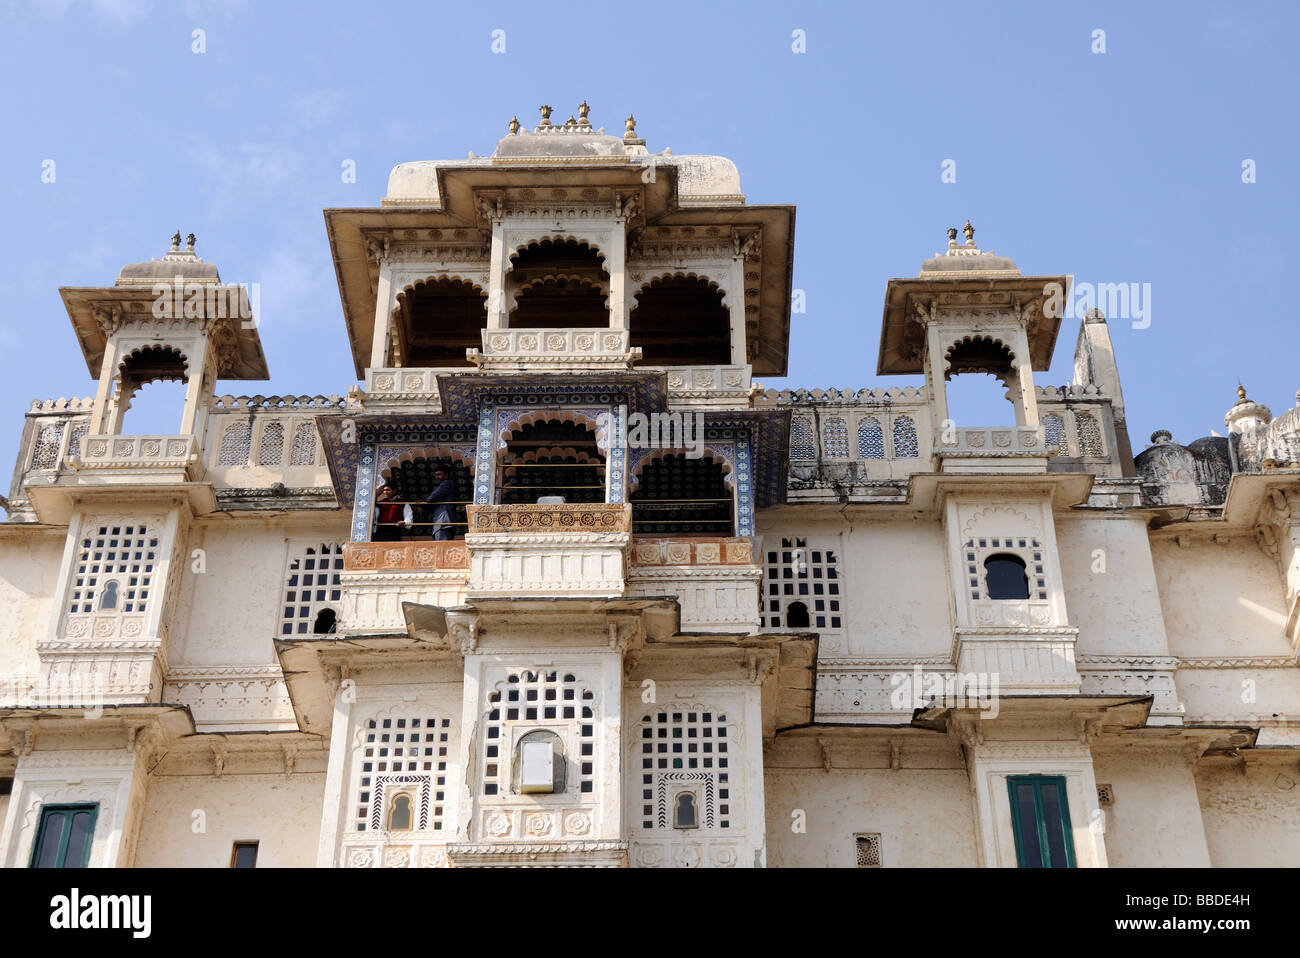 Ornate pavilion on the top of the City Palace,  Udaipur, Rajasthan, Republic of India. Stock Photo